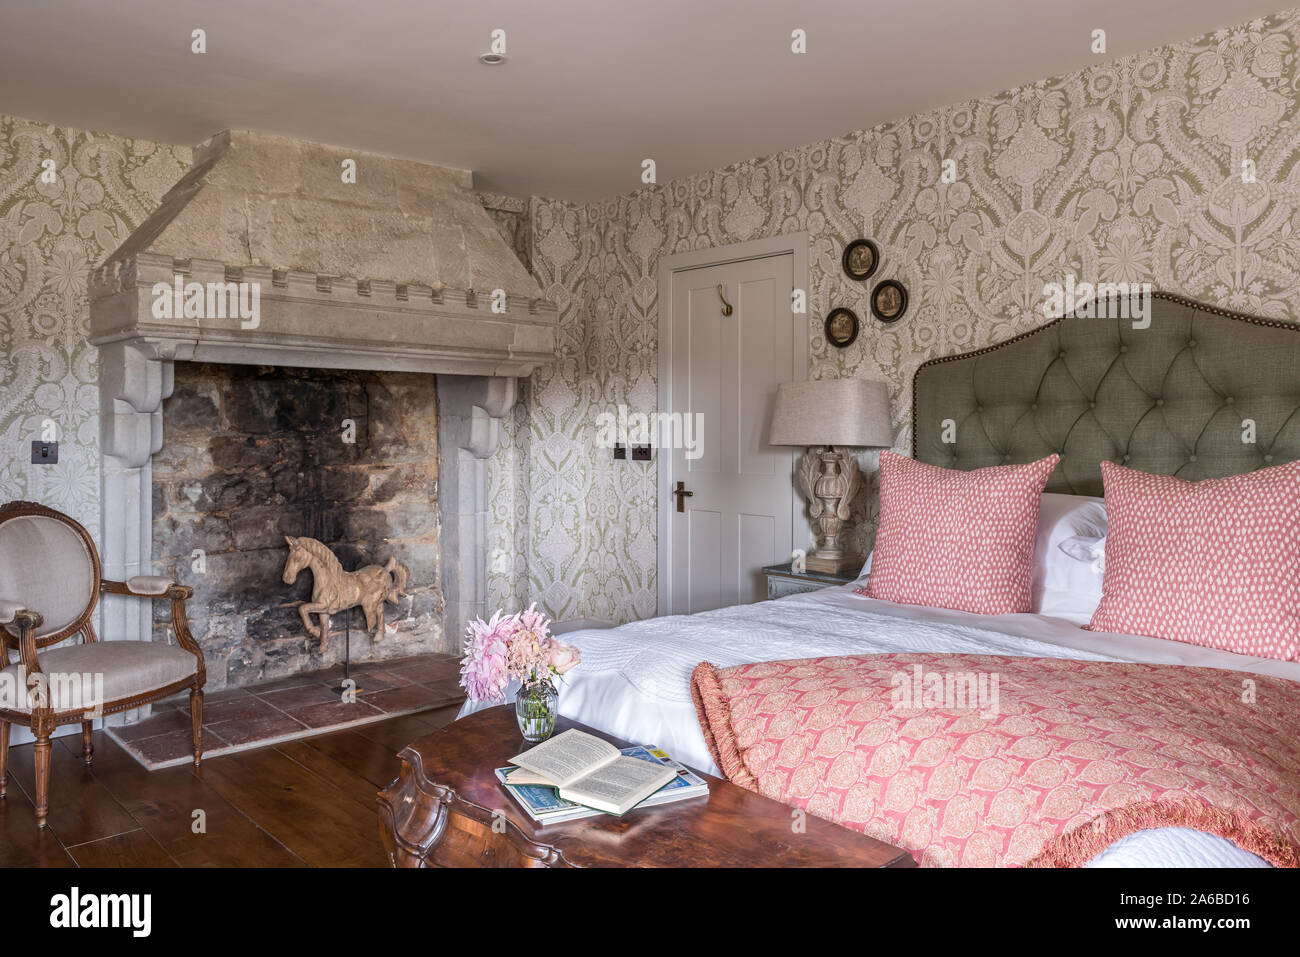 wallpaper 1930s high resolution stock photography and images alamy https www alamy com 1930s art deco style wallpaper and old stone fireplace in bedroom image330936626 html